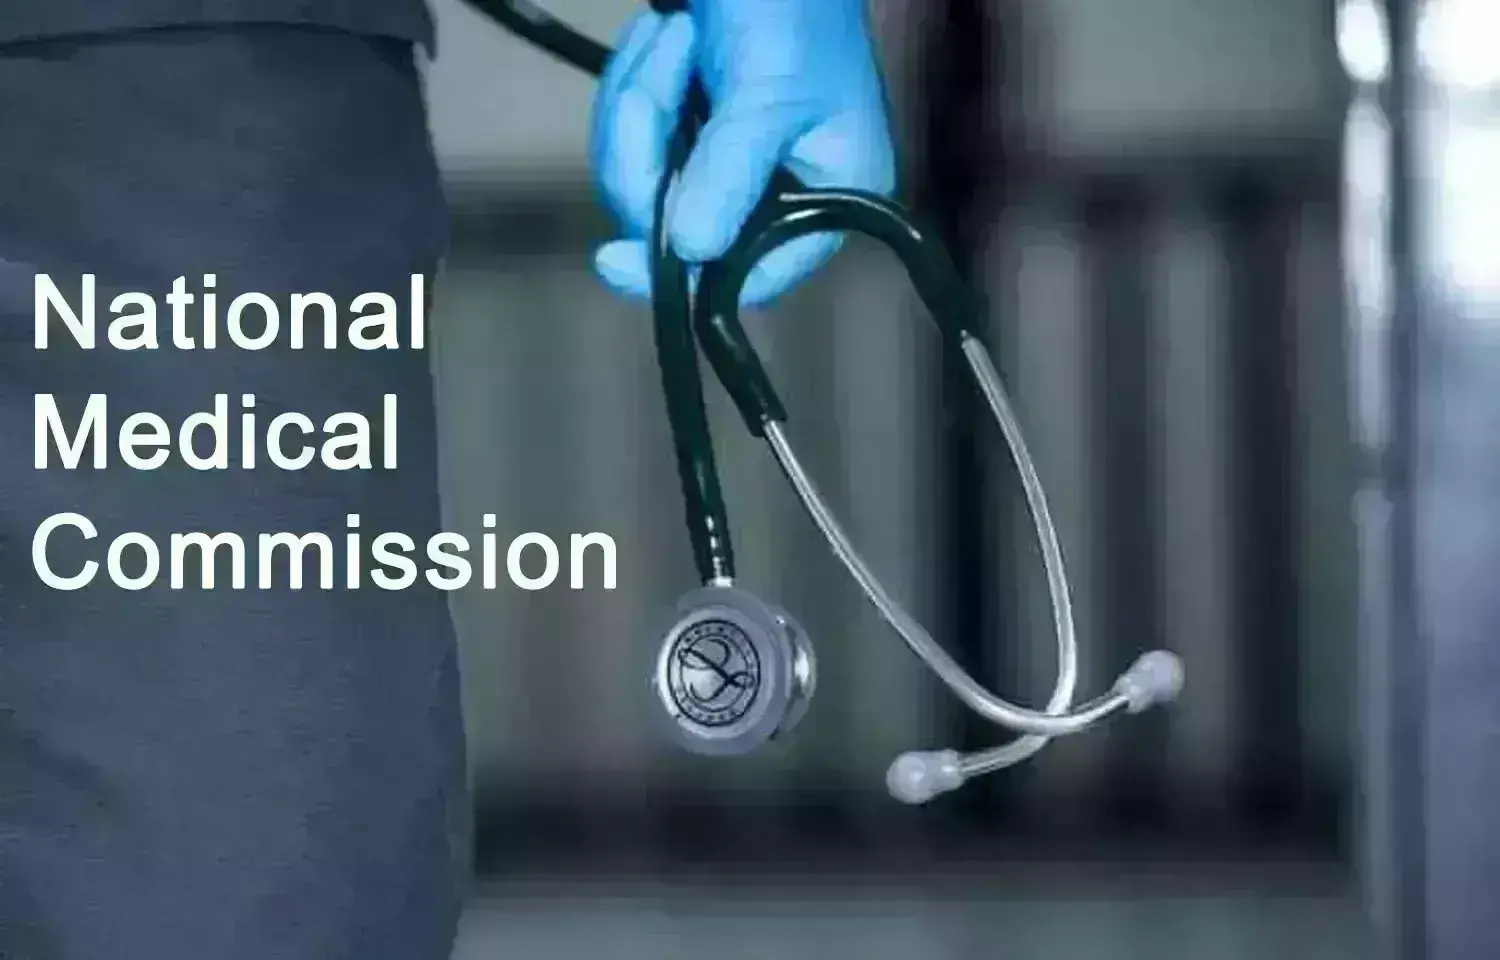 Only doctors can Appeal against action taken by State Medical Councils: NMC